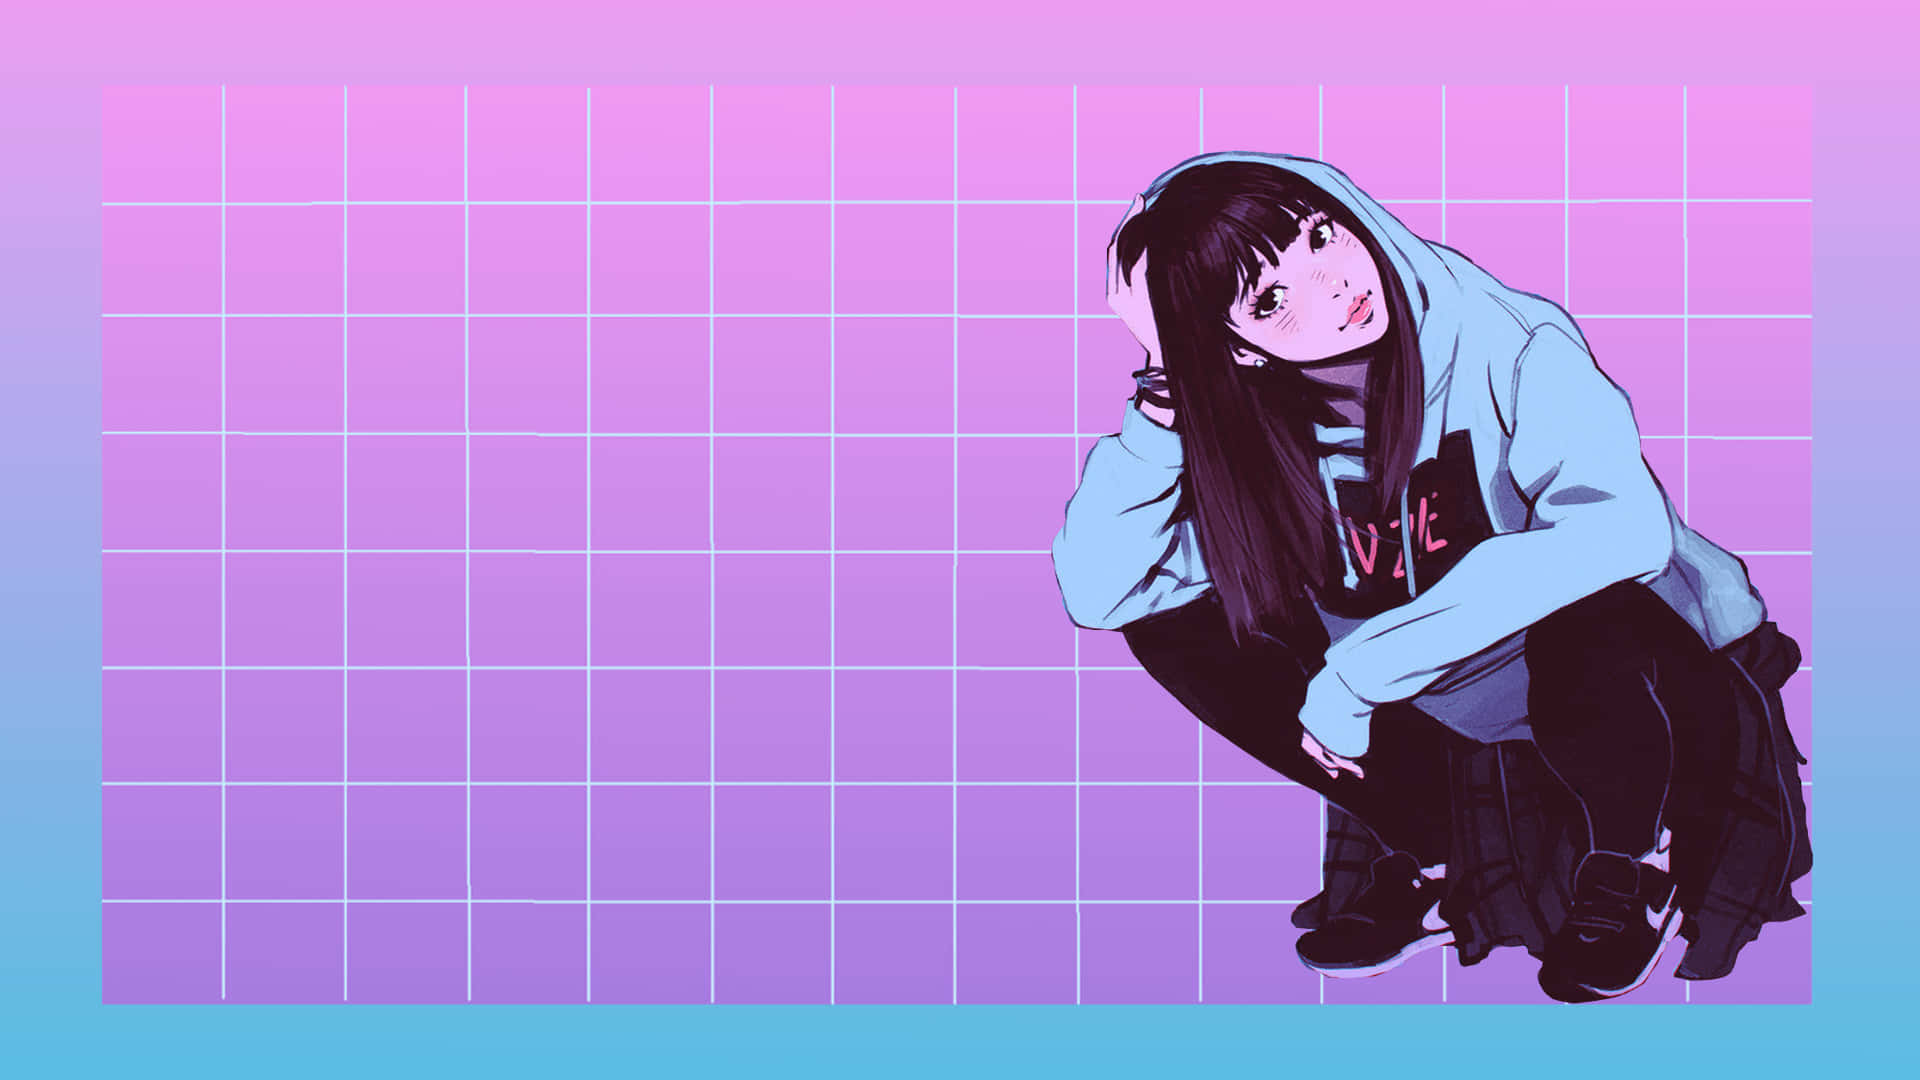 Keep it Cute and Aesthetic with this Anime Desktop Wallpaper